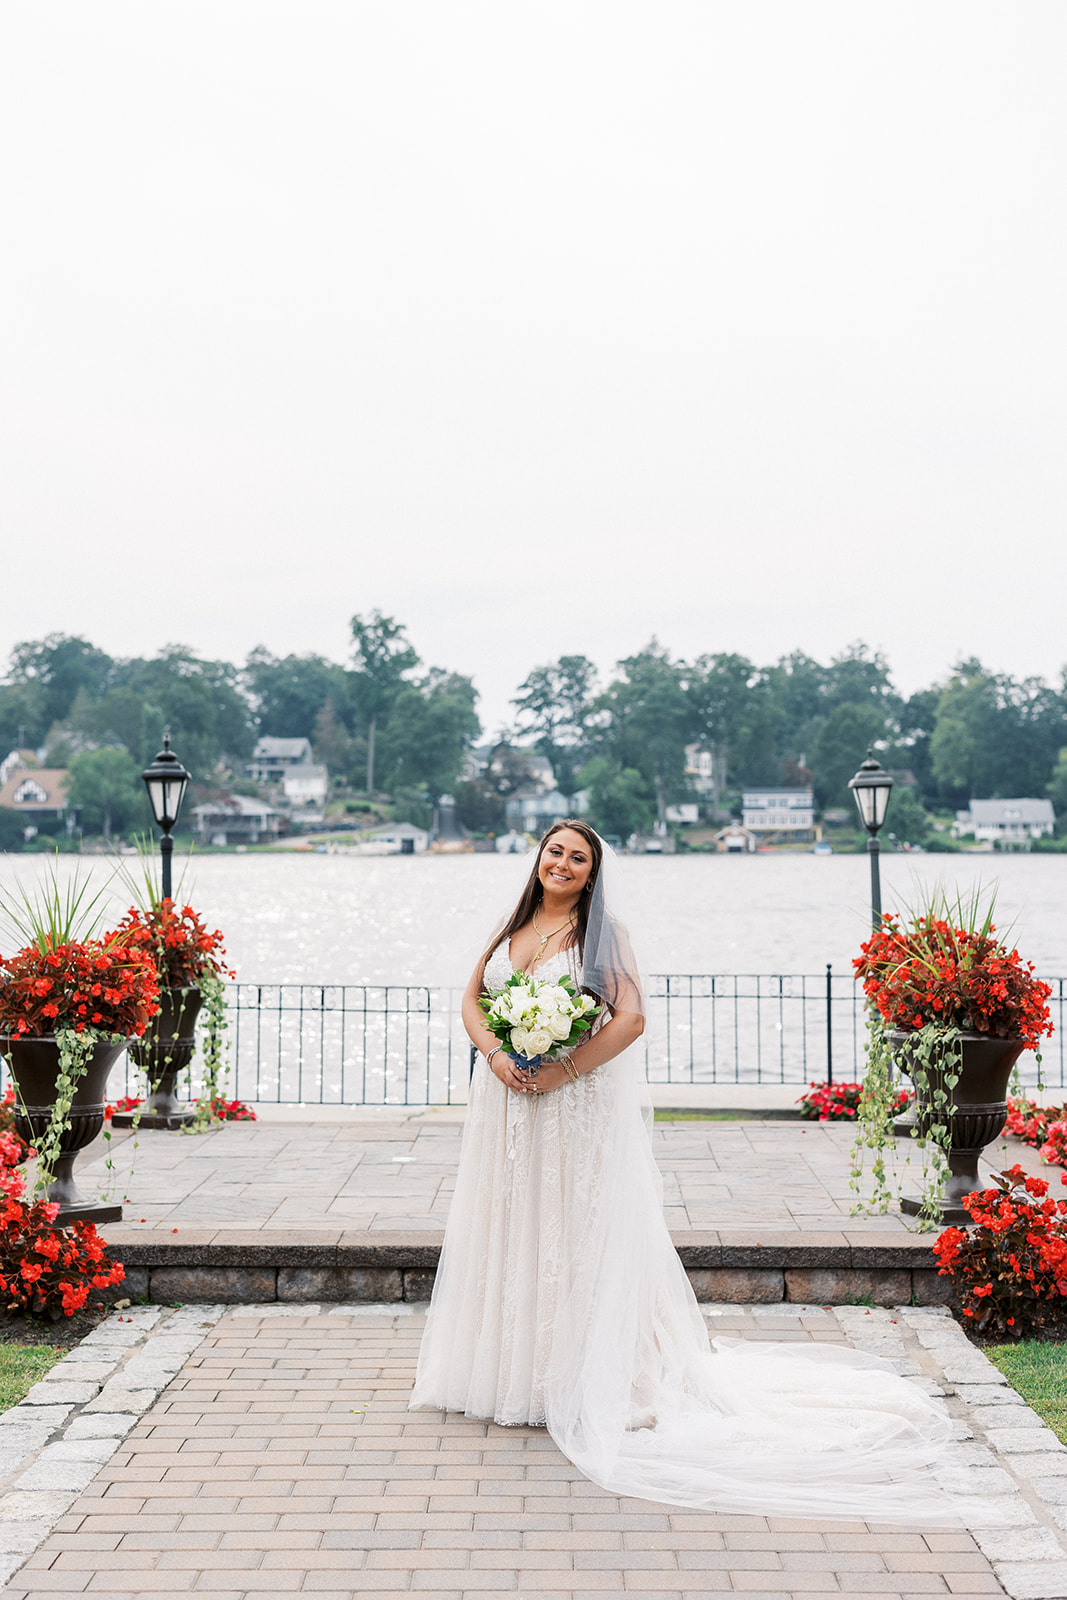 A bride holds her bouquet while standing with a long train on a waterfront brick path surrounded by red flowers